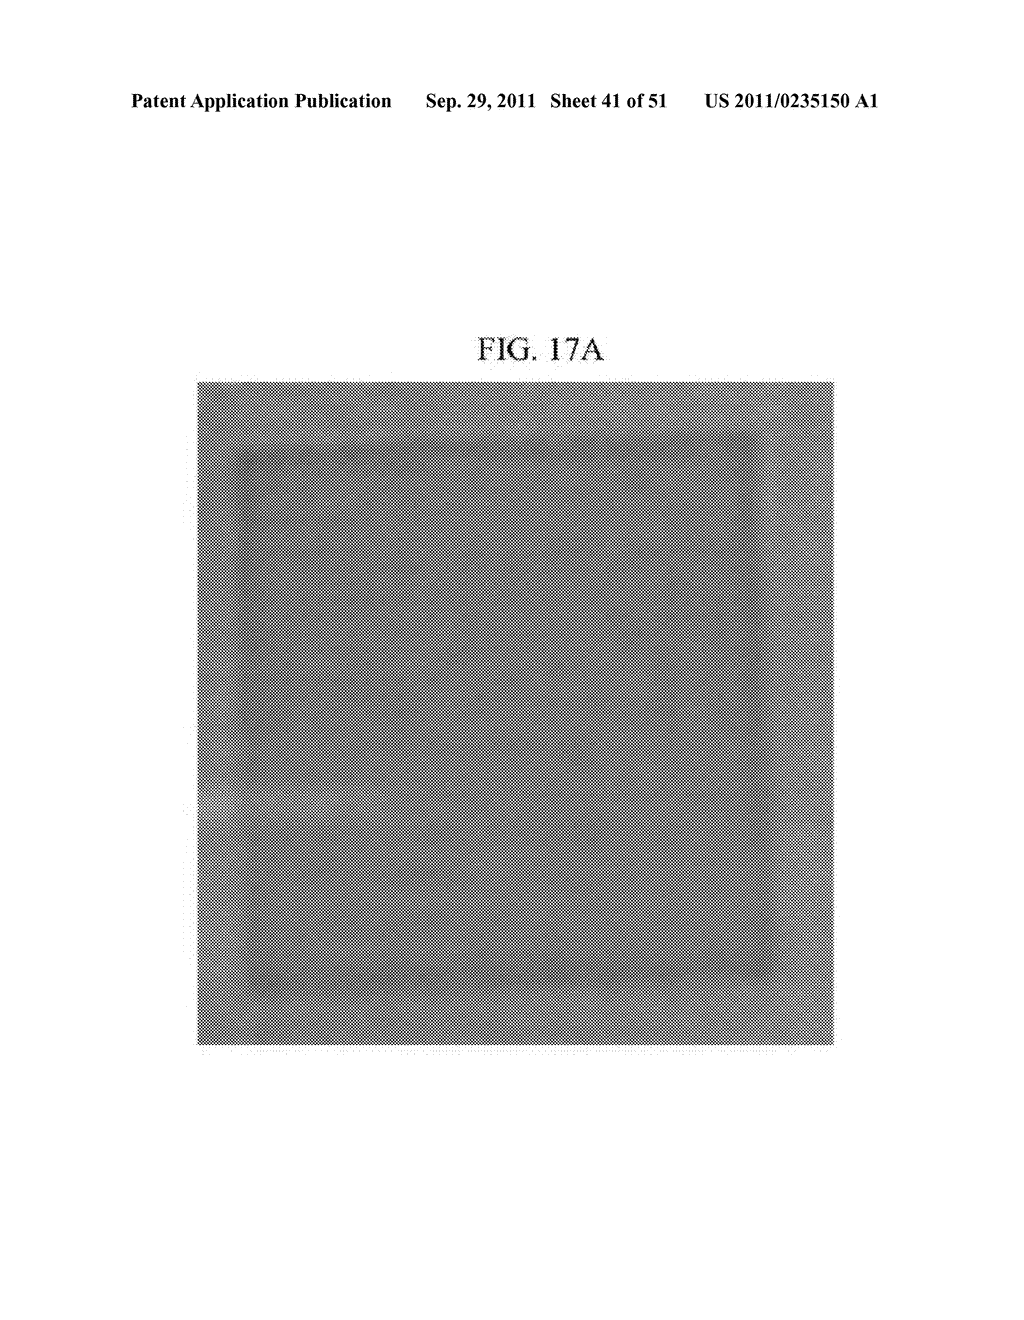 ELECTROCHROMIC MATERIAL AND ELECTROCHROMIC DEVICE INCLUDING THE SAME - diagram, schematic, and image 42